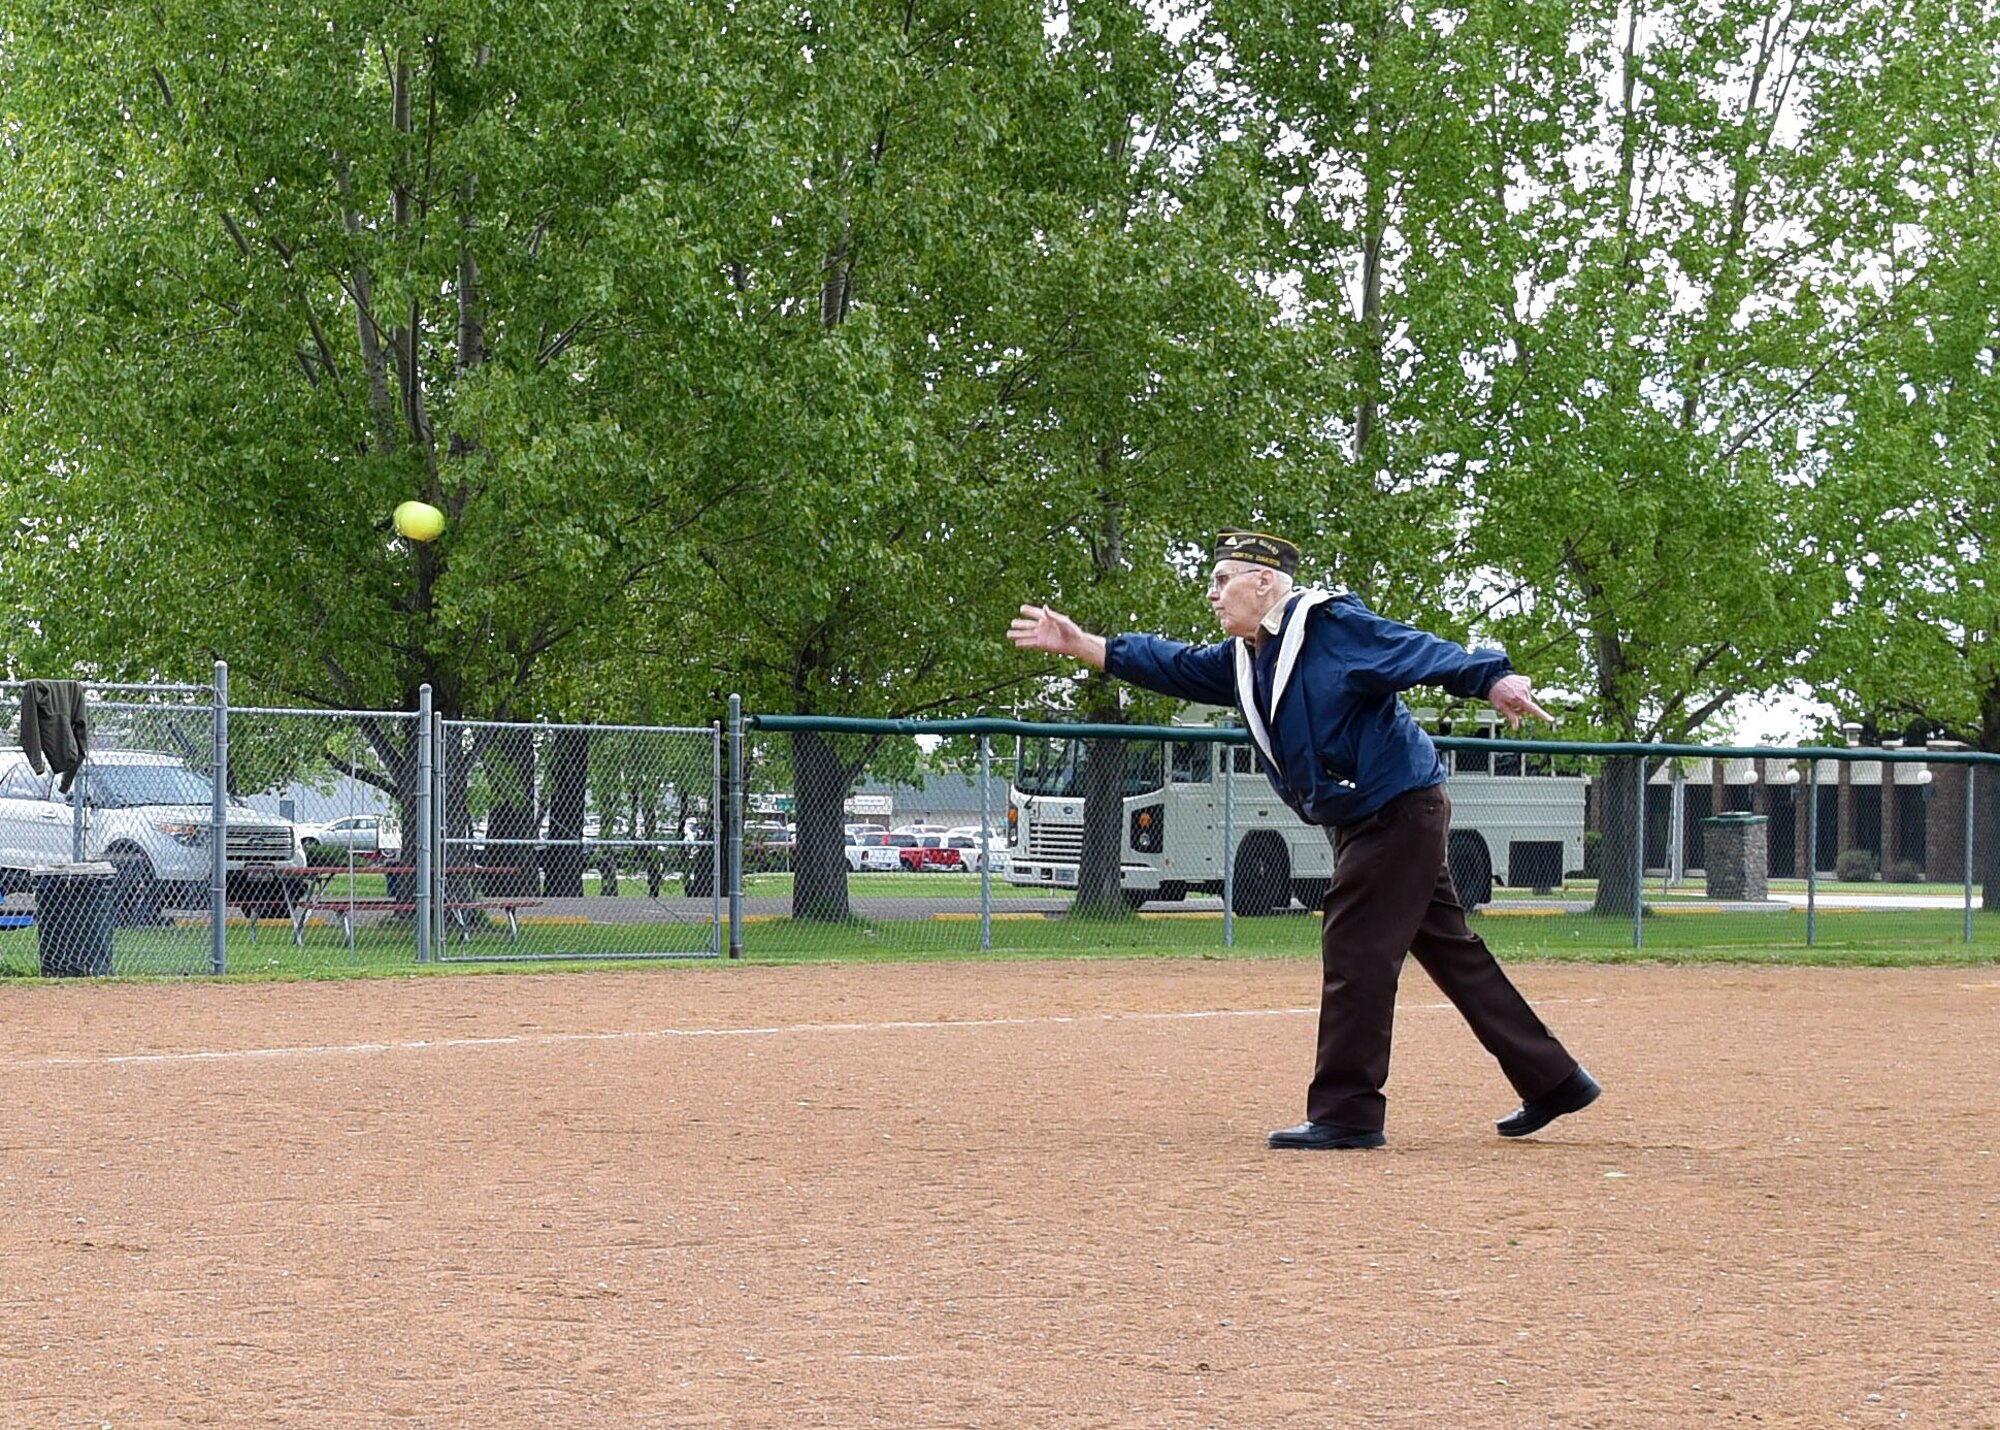 An Army Air Corps veteran, 93, makes the first pitch of the annual Grand Forks AFB versus Minot AFB softball game May 25, 2017, at Devil’s Lake, N.D. His pitch kicked off the day’s activities, which included two scrimmages before the “official” game. (U.S. Air Force photo by Airman 1st Class Elora McCutcheon)